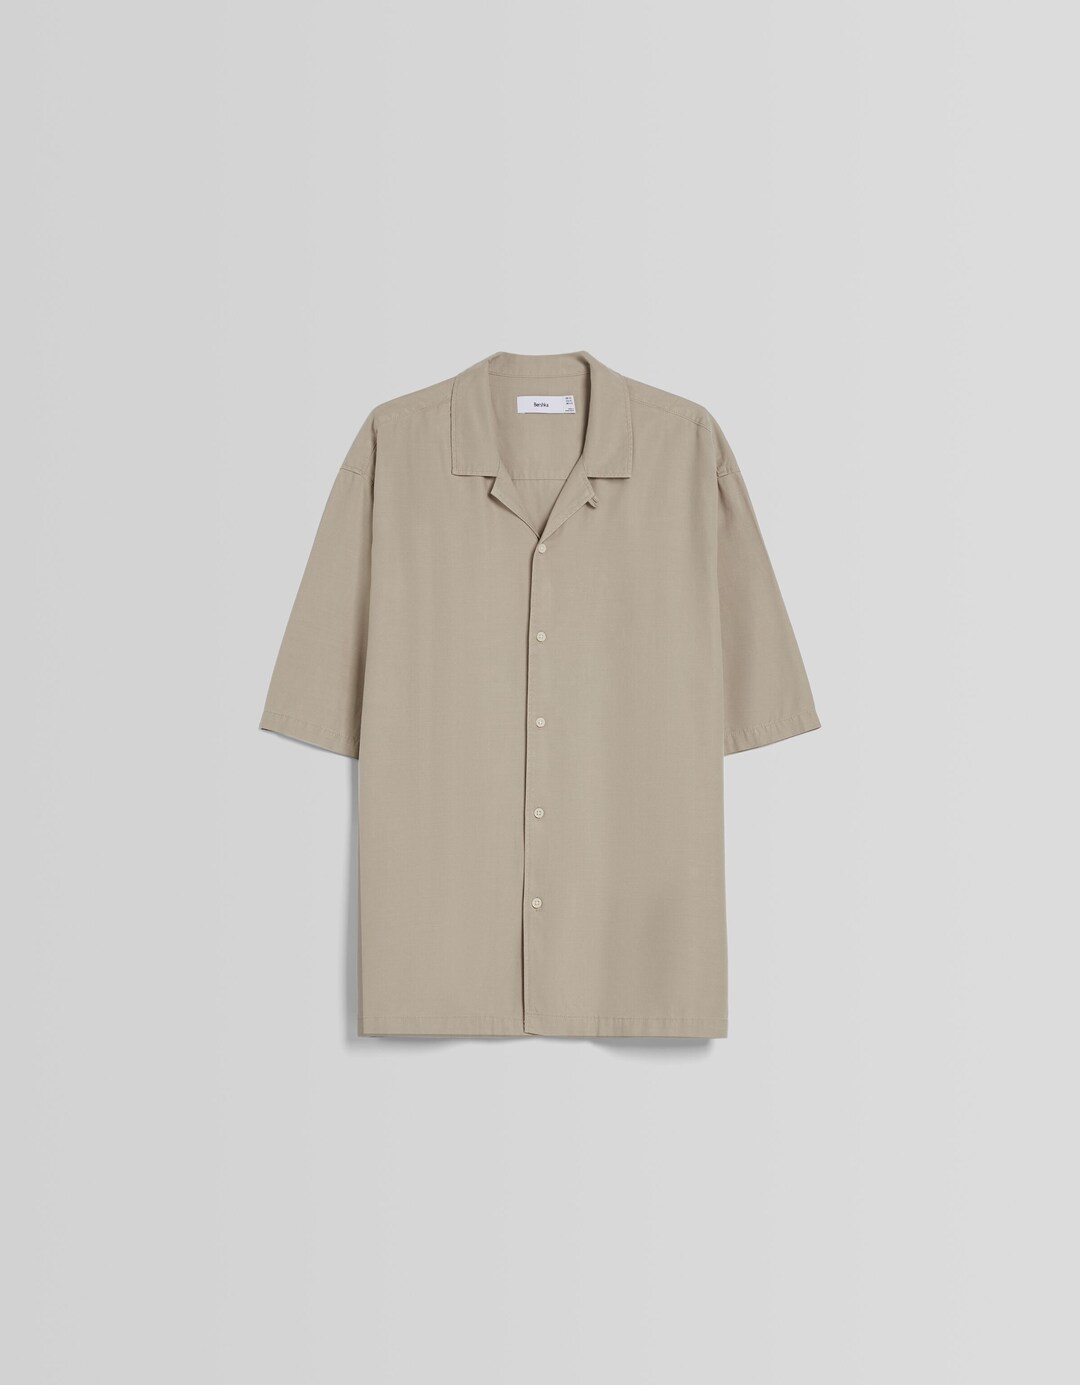 Short sleeve relaxed fit rustic shirt